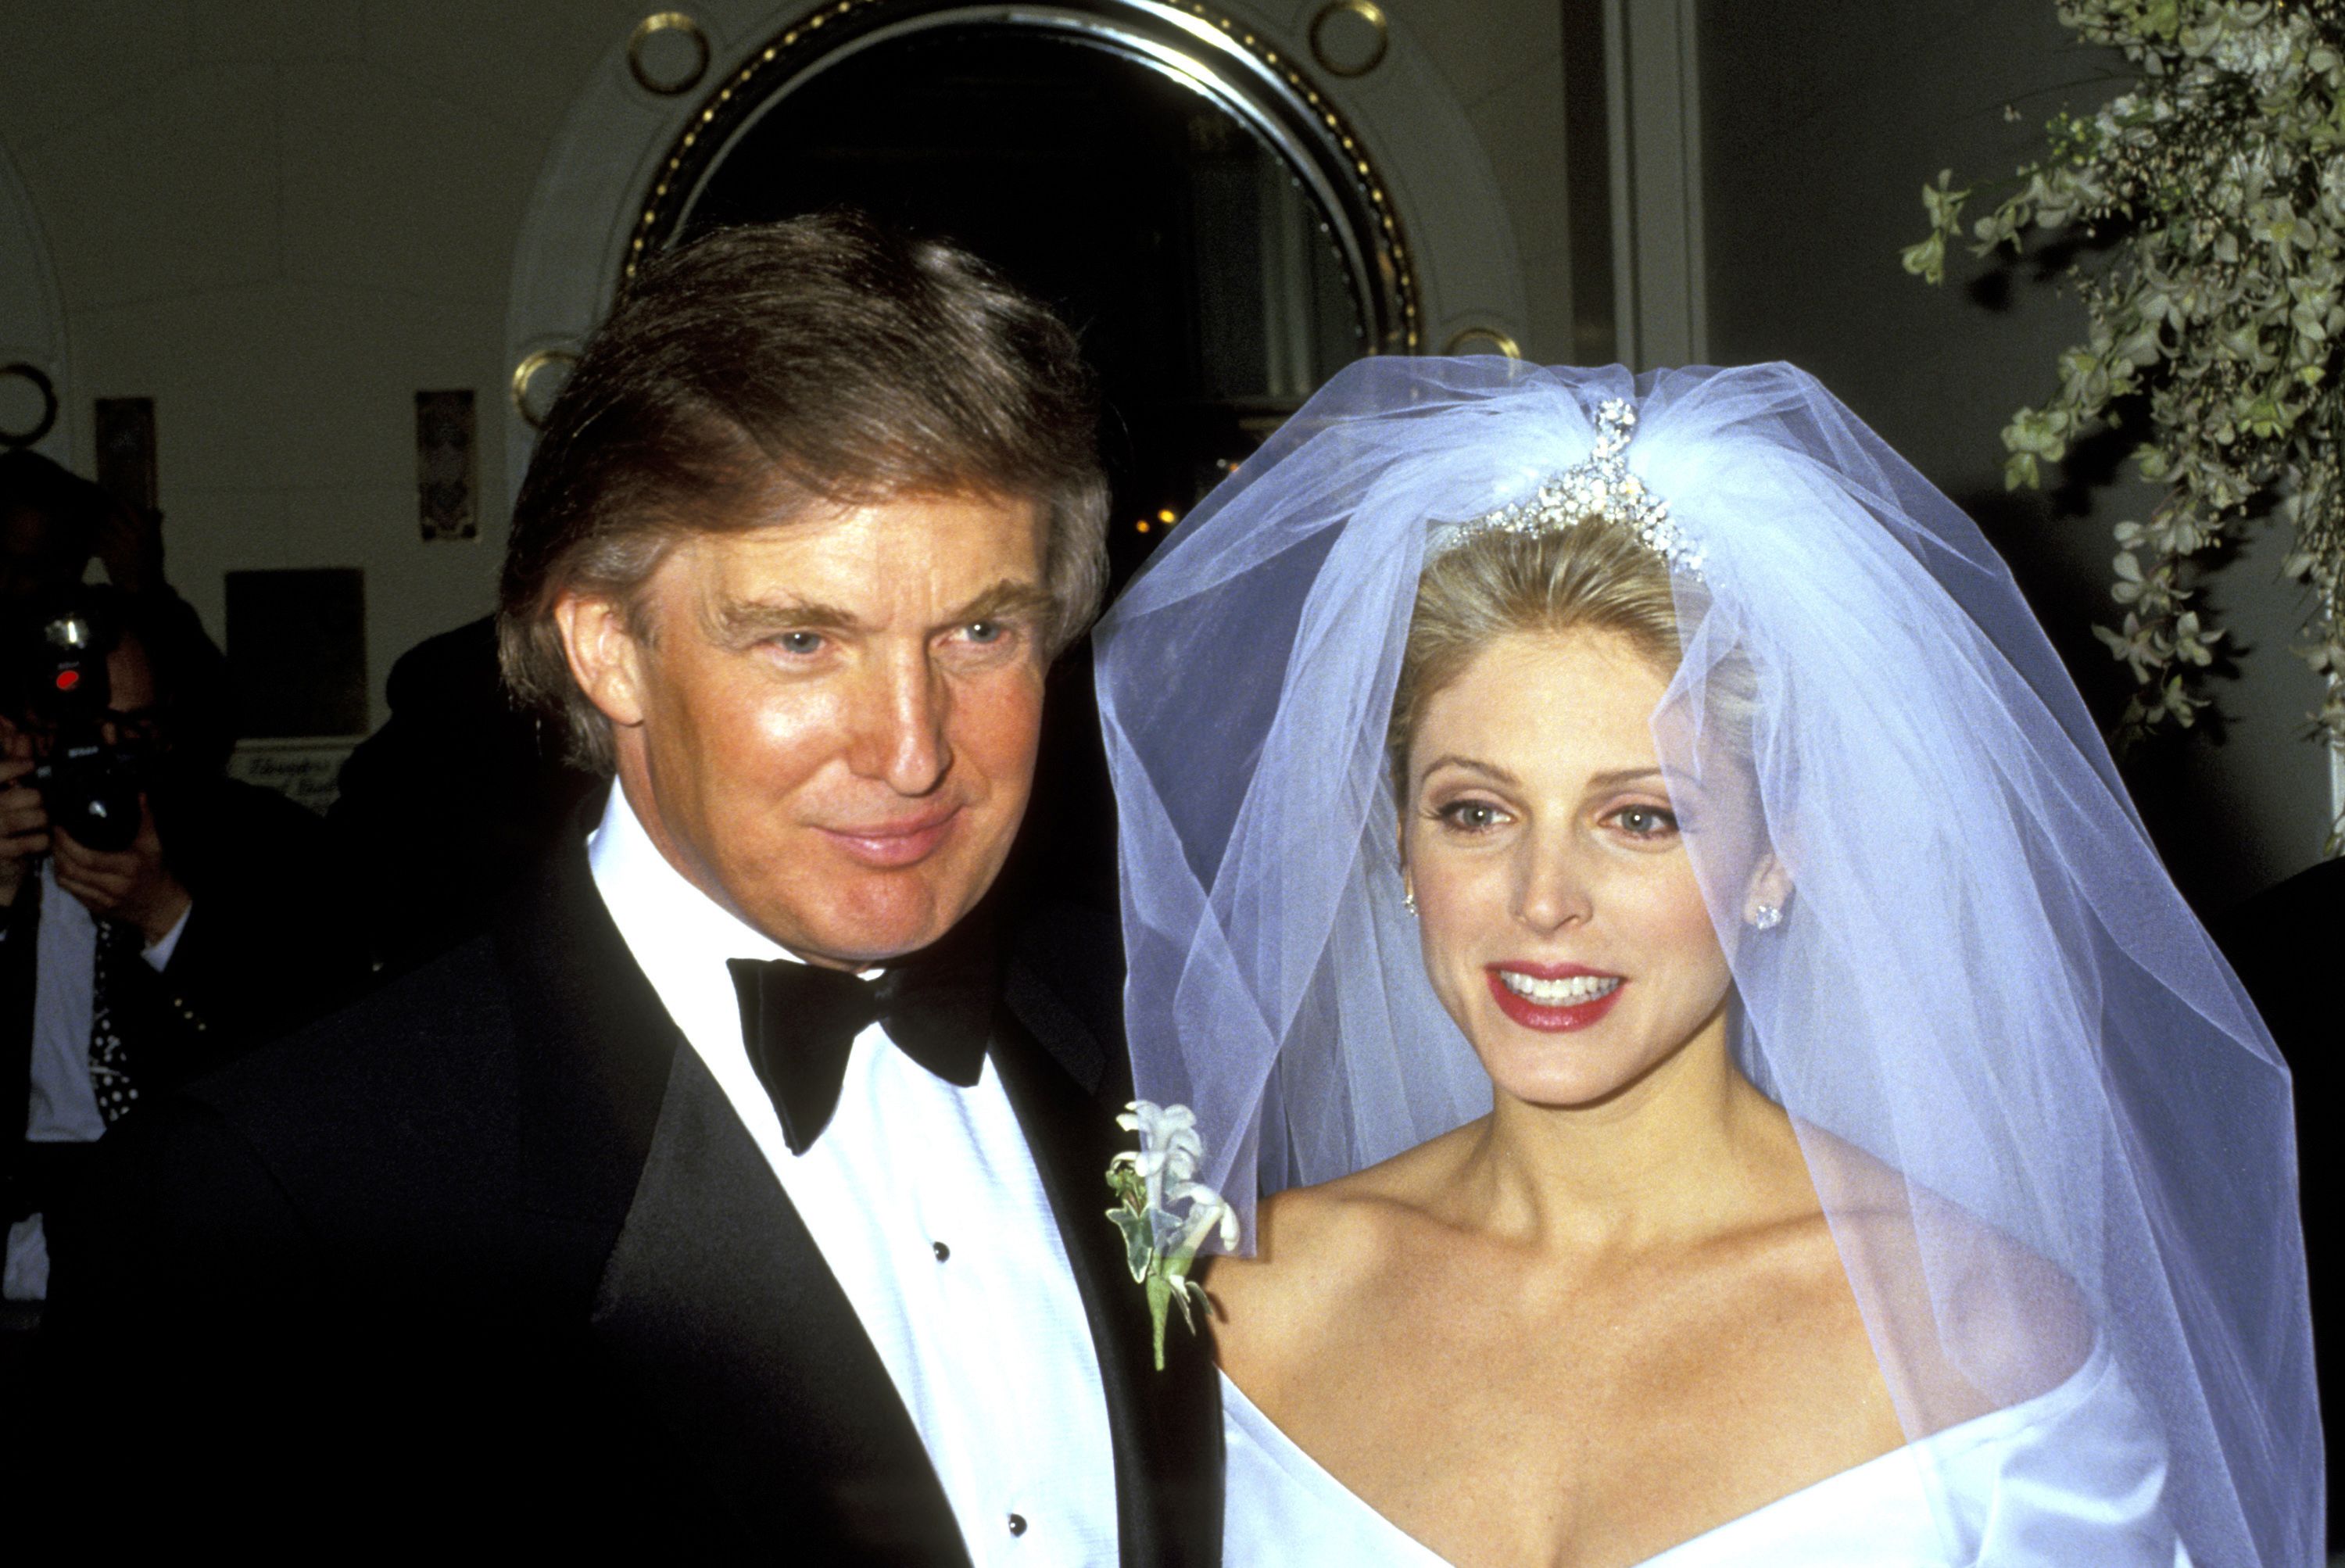 Marla Maples and Donald Trump's wedding in New York City, 20th December 1993 | Source: Getty Images